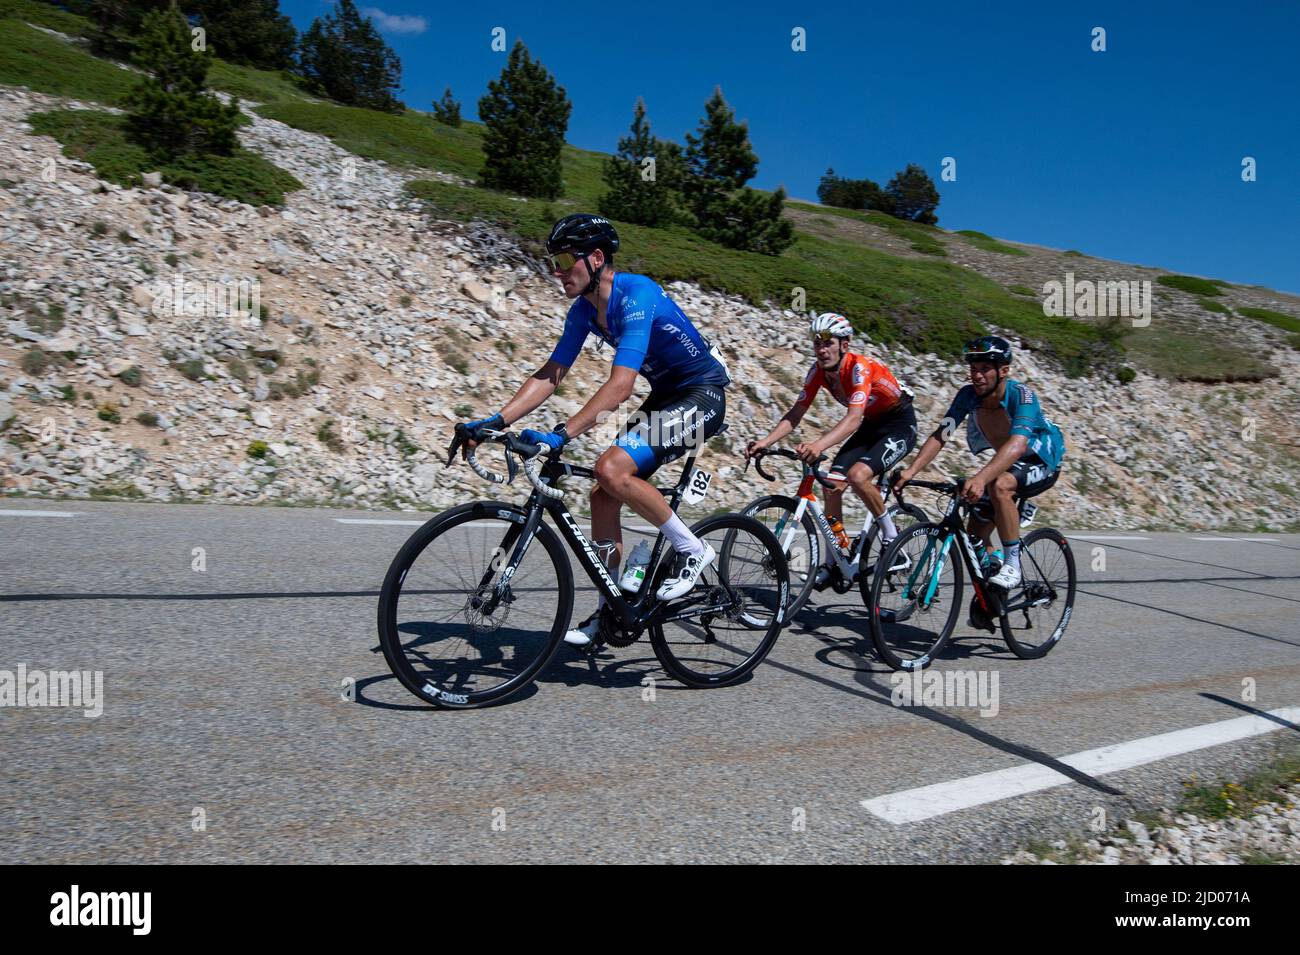 From L to R: Jean Goubert (Nice métropole côte d’azur team), Joris Delbove (st michel – auber93 team) and  Thibault Ferasse (b&b hotels – ktm team) seen in action three kilometers from the finish line. The 4th edition of the CIC - Mont Ventoux Dénivelé Challenges is part of the UCI Europe Tour 2022 calendar in category 1.1. Starting from Vaison la Romaine, the distance to be covered is 154 kilometers of race with a double ascent of Mont Ventoux with a summit finish. Ruben Guerreiro (EF-Education EasyPost) won the Mont Ventoux Dénivelé Challenges solo ahead of teammate Esteban Chaves (EF-Educat Stock Photo